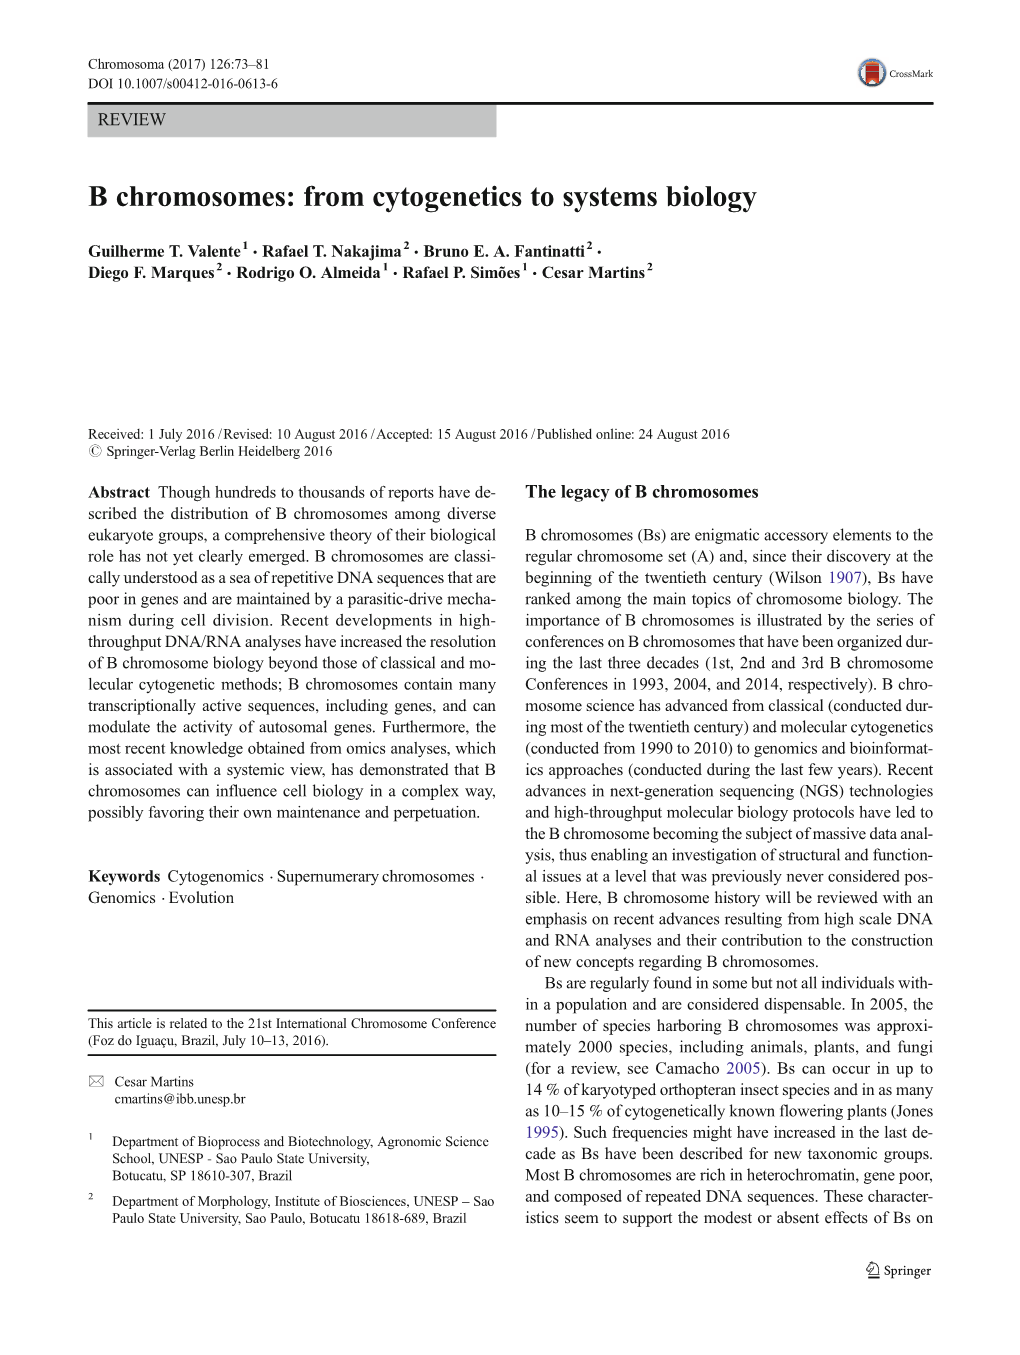 B Chromosomes: from Cytogenetics to Systems Biology